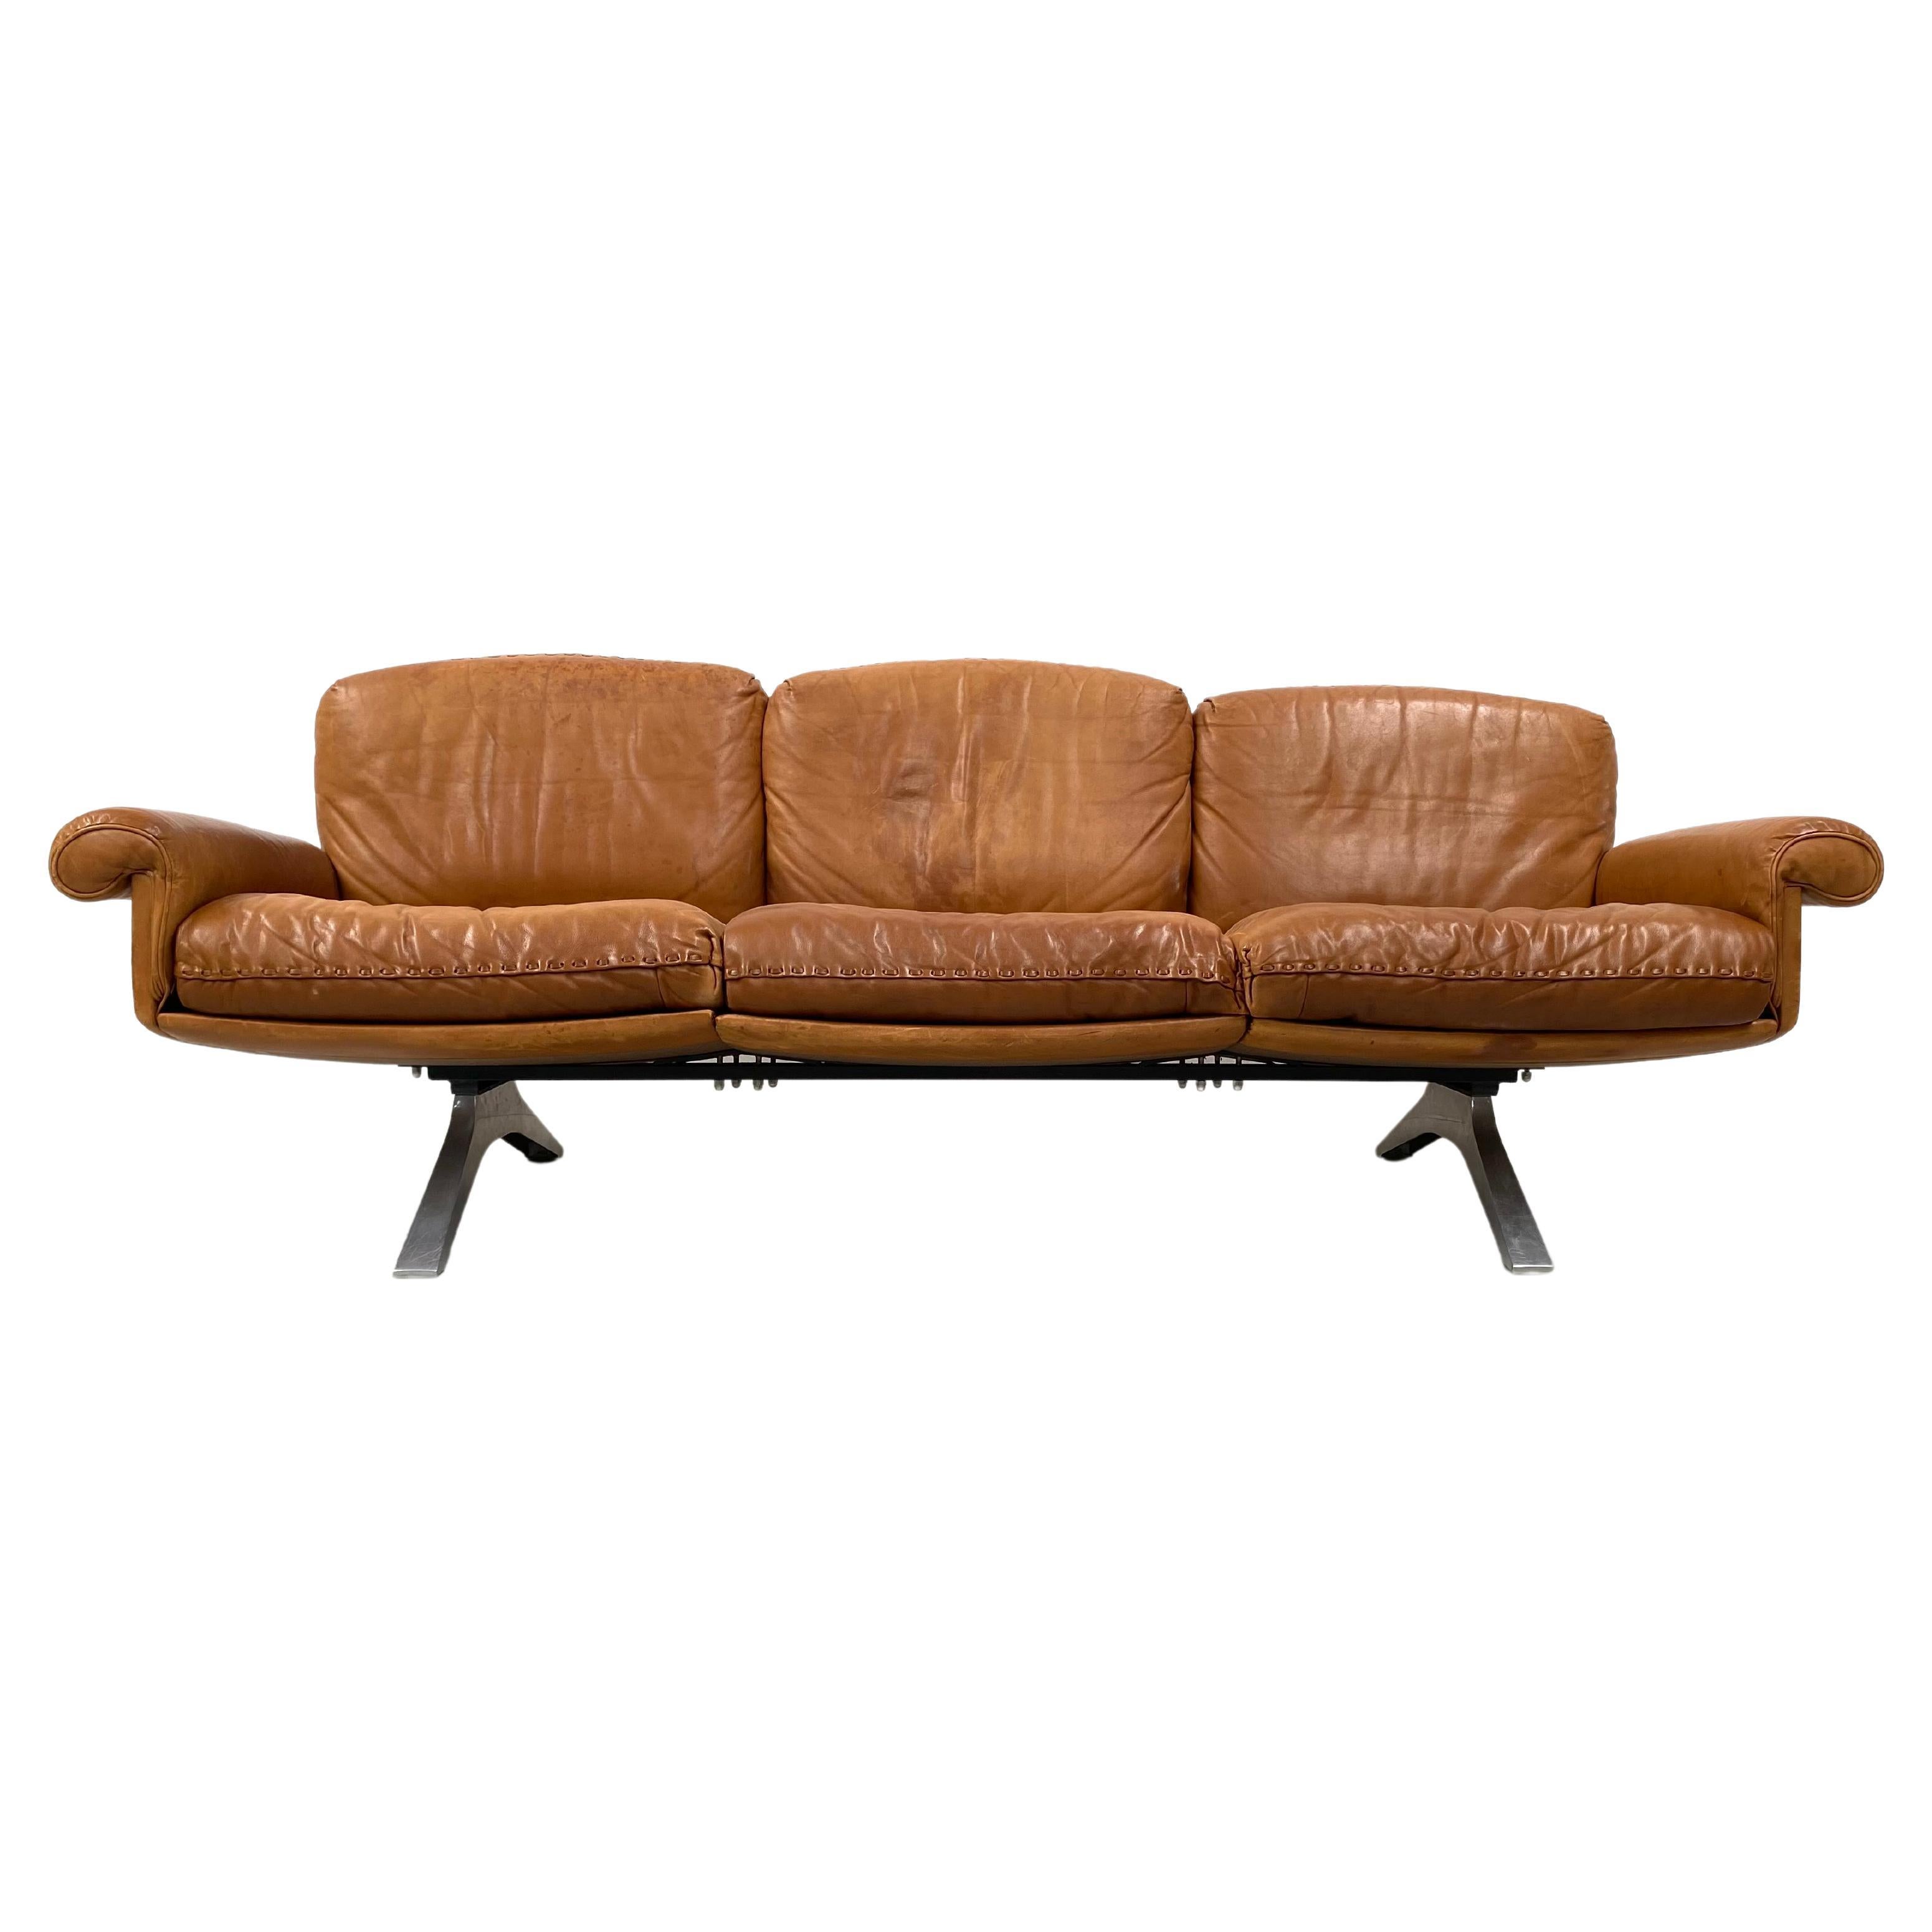 Vintage Swiss DS-31 3-Seater Sofa in Cognac Leather by Desede, 1970s